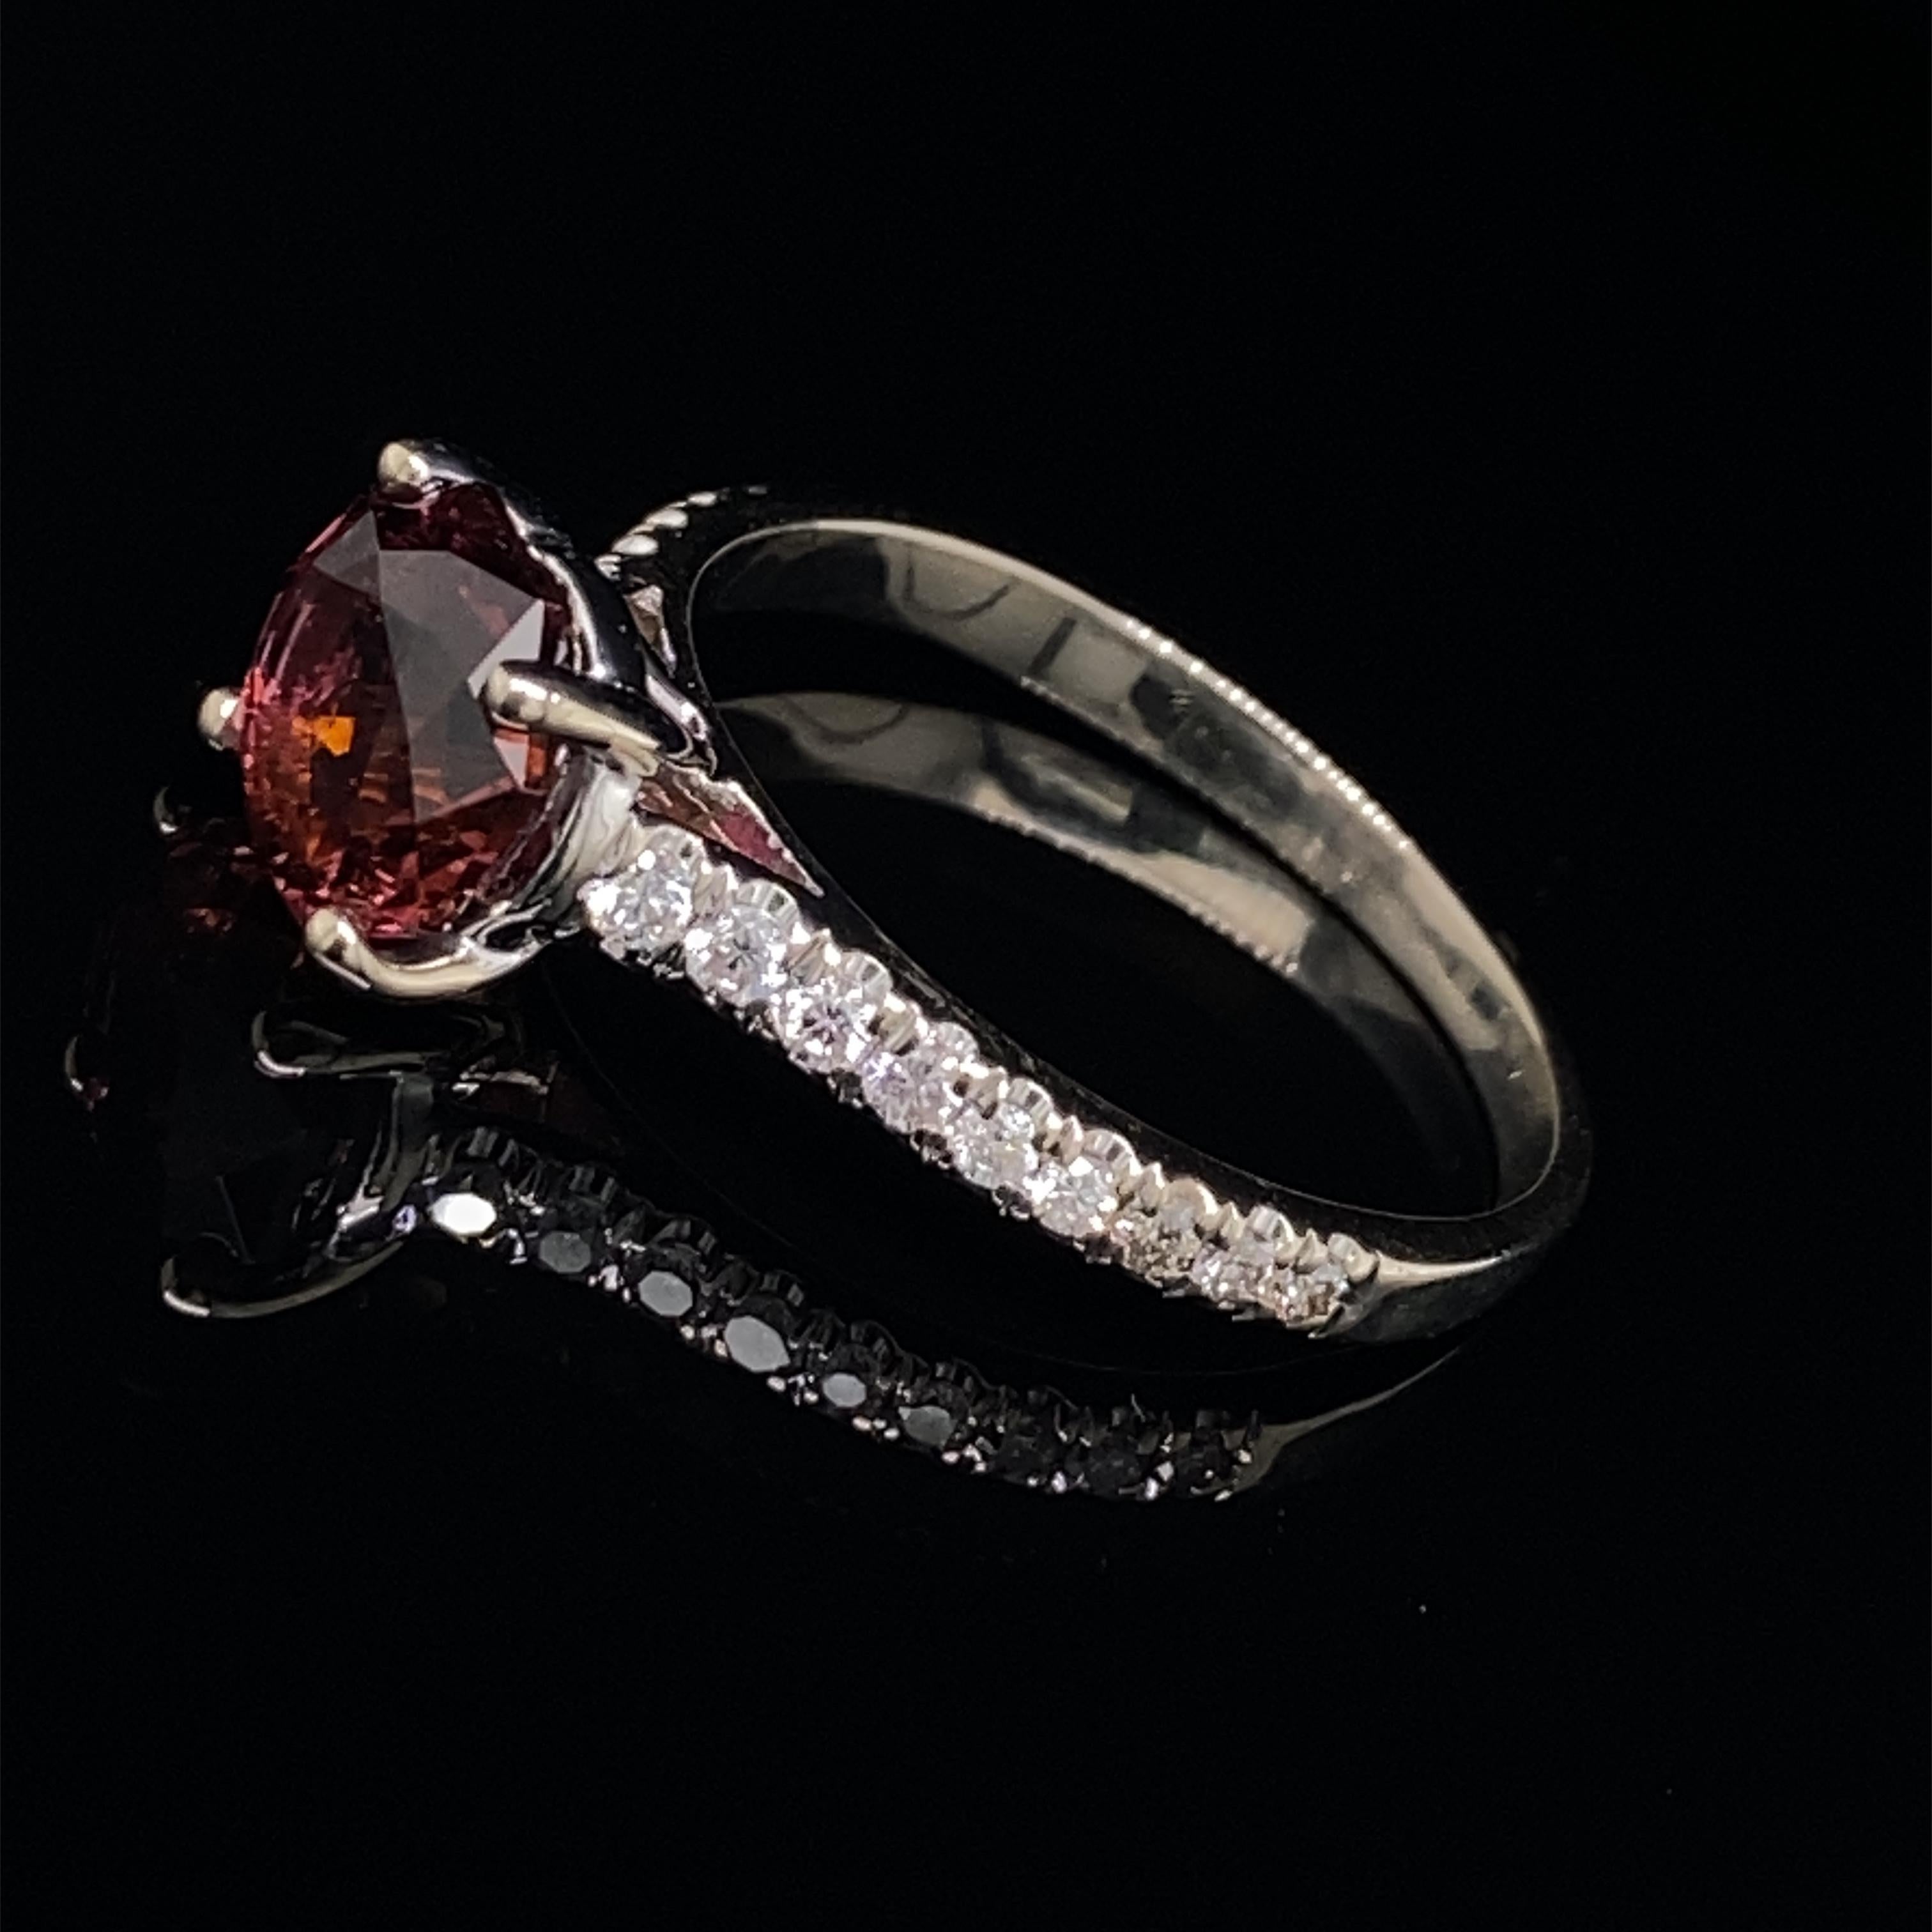 Radiant Cut 1.7 Carat Dark Pink Tourmaline Octagon in White Gold Ring with Diamond Band